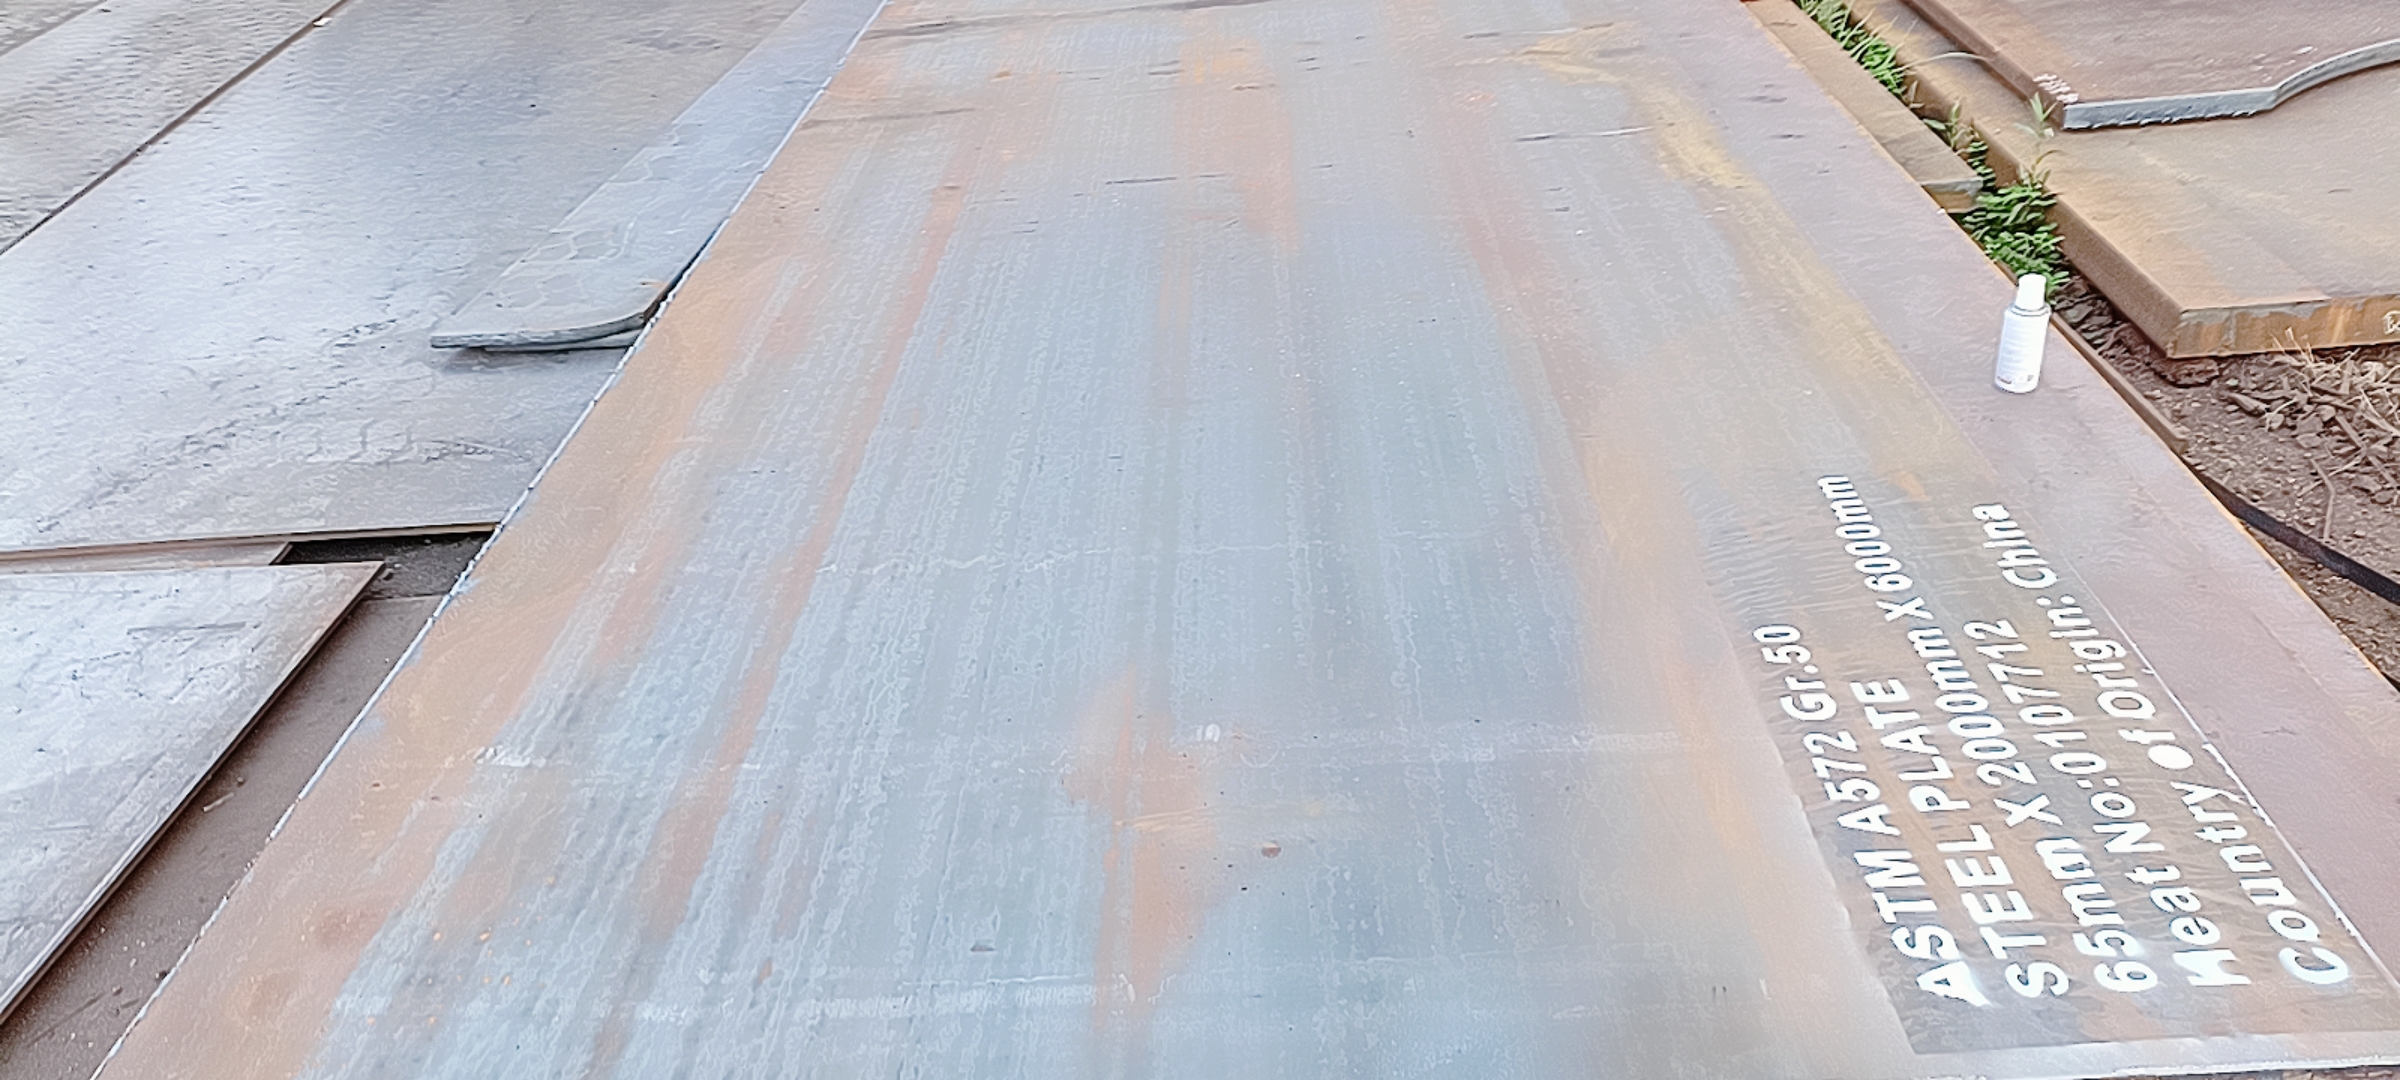 ASTM A572 GR.50 steel plates were shipped to Vietnam